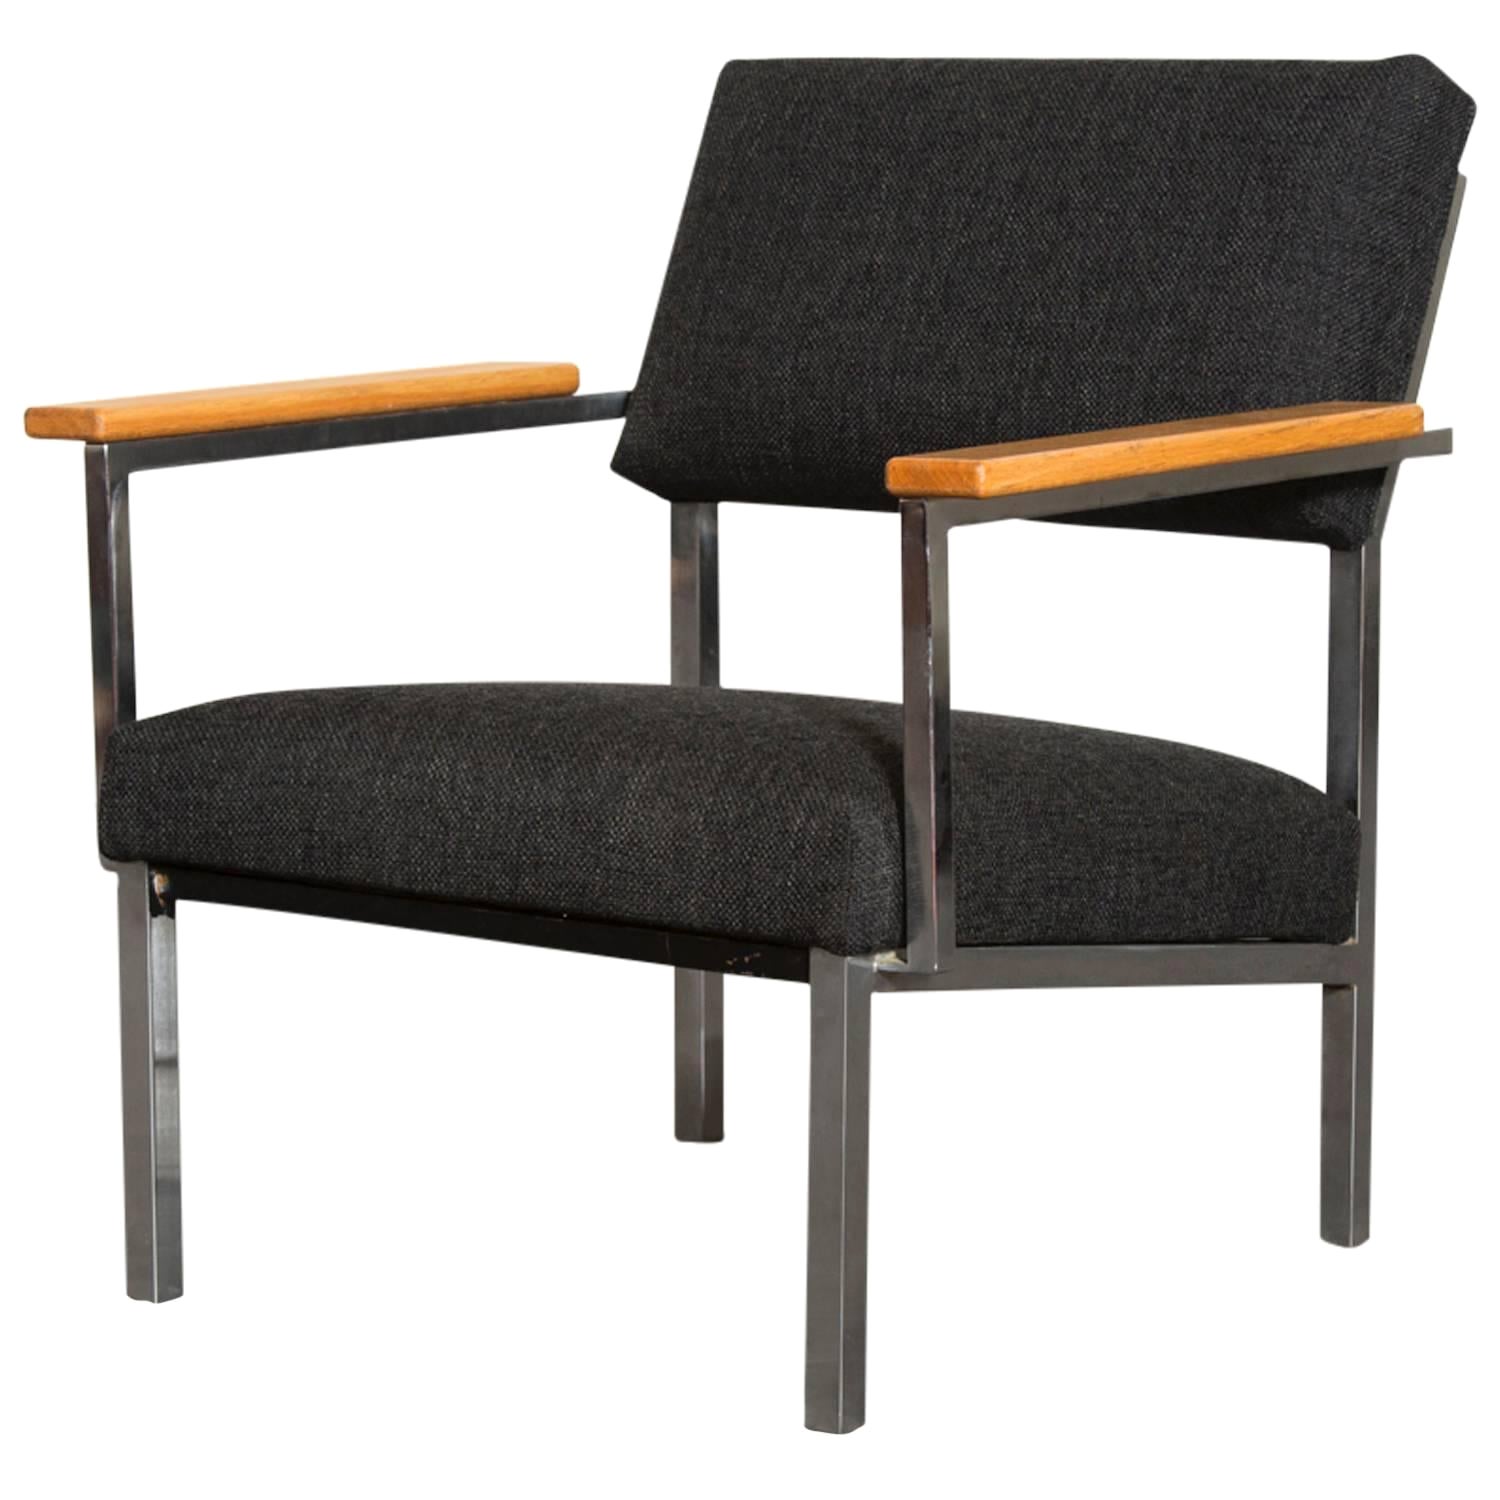  Mid-Century Martin Visser Lounge Chair in Charcoal and Chrome 